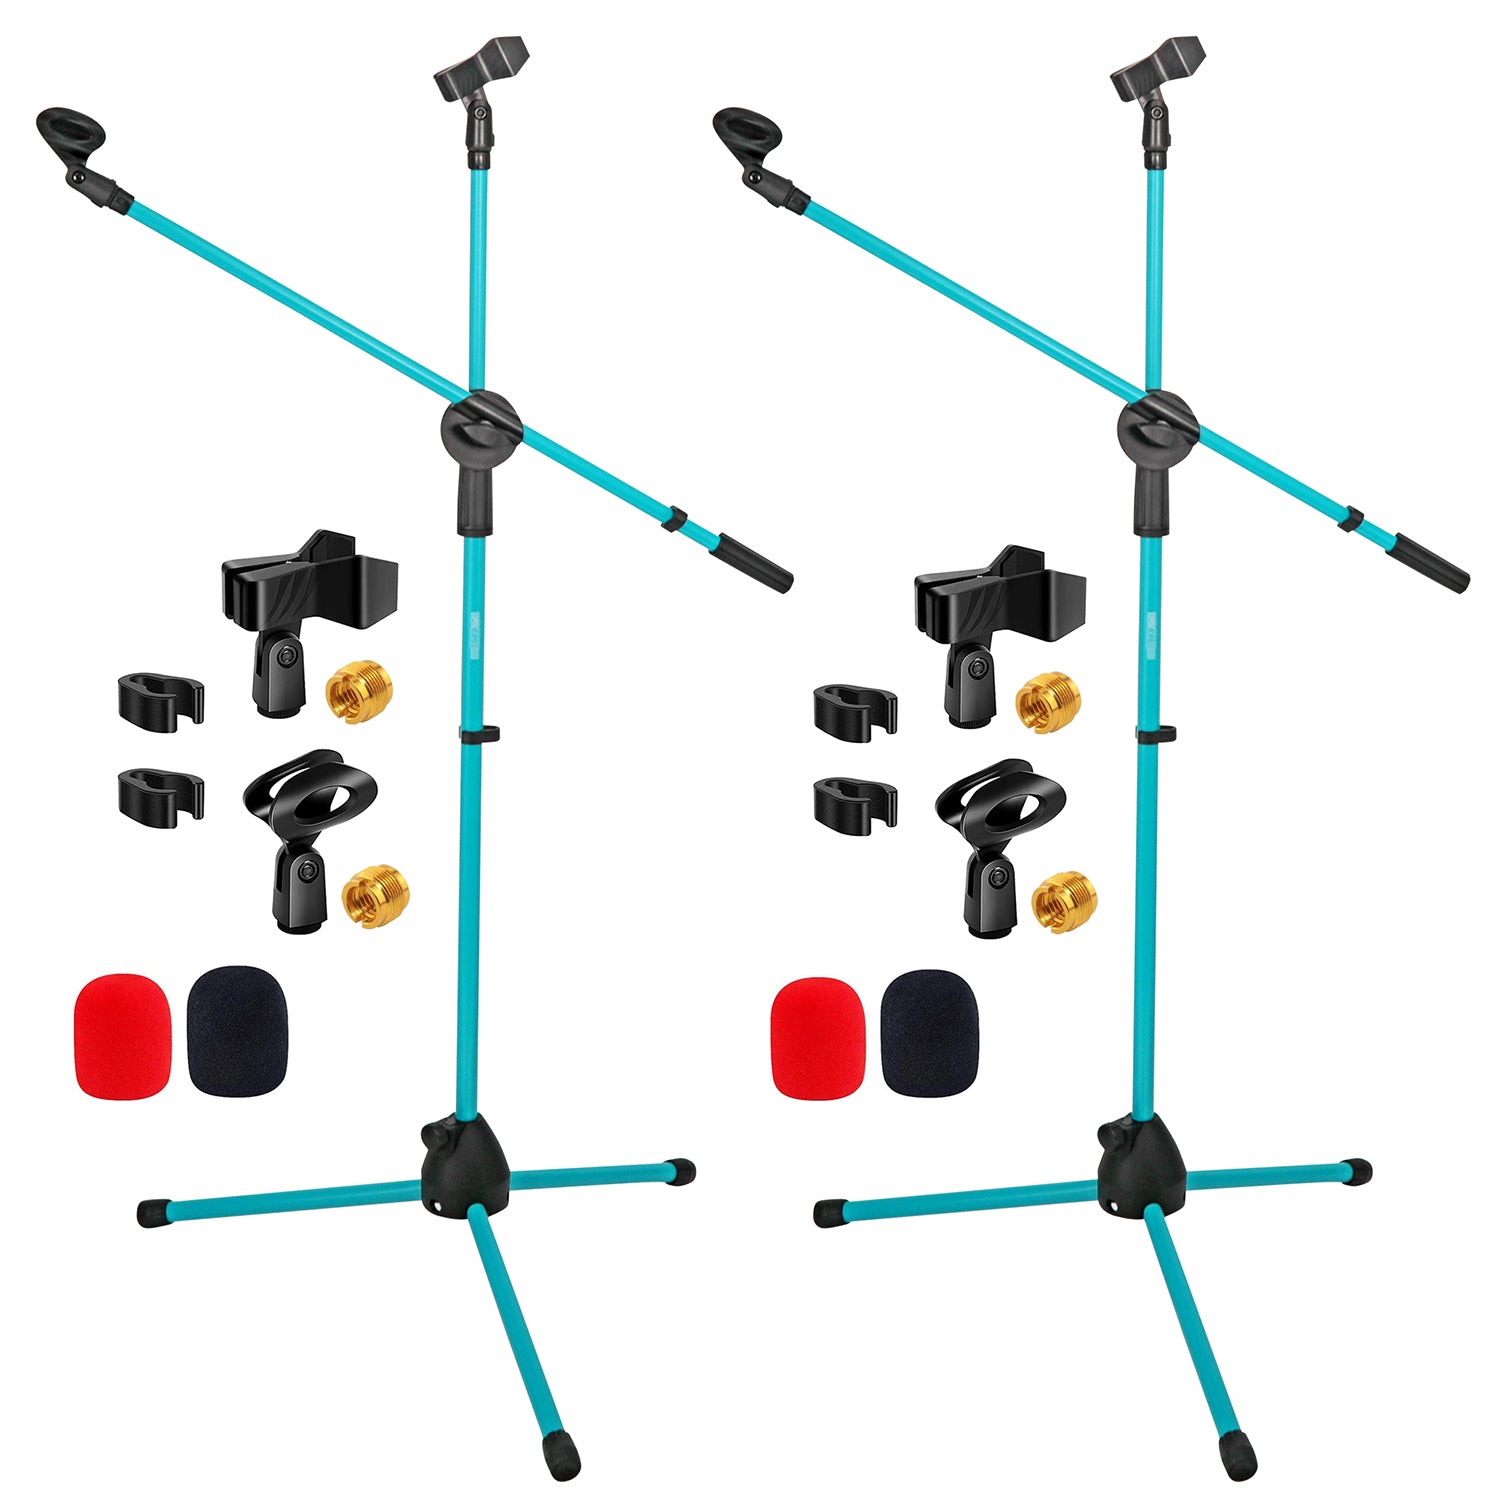 5 Core Mic Stand Collapsible Height Adjustable 31 to 59” Dual Metal Microphone Tripod Stand w Boom Arm Stand Para Microfono for Singing, Karaoke, Stage and Outdoor Activities 2Pc Sky Blue - MS DBL G SKY BLU 2pcs